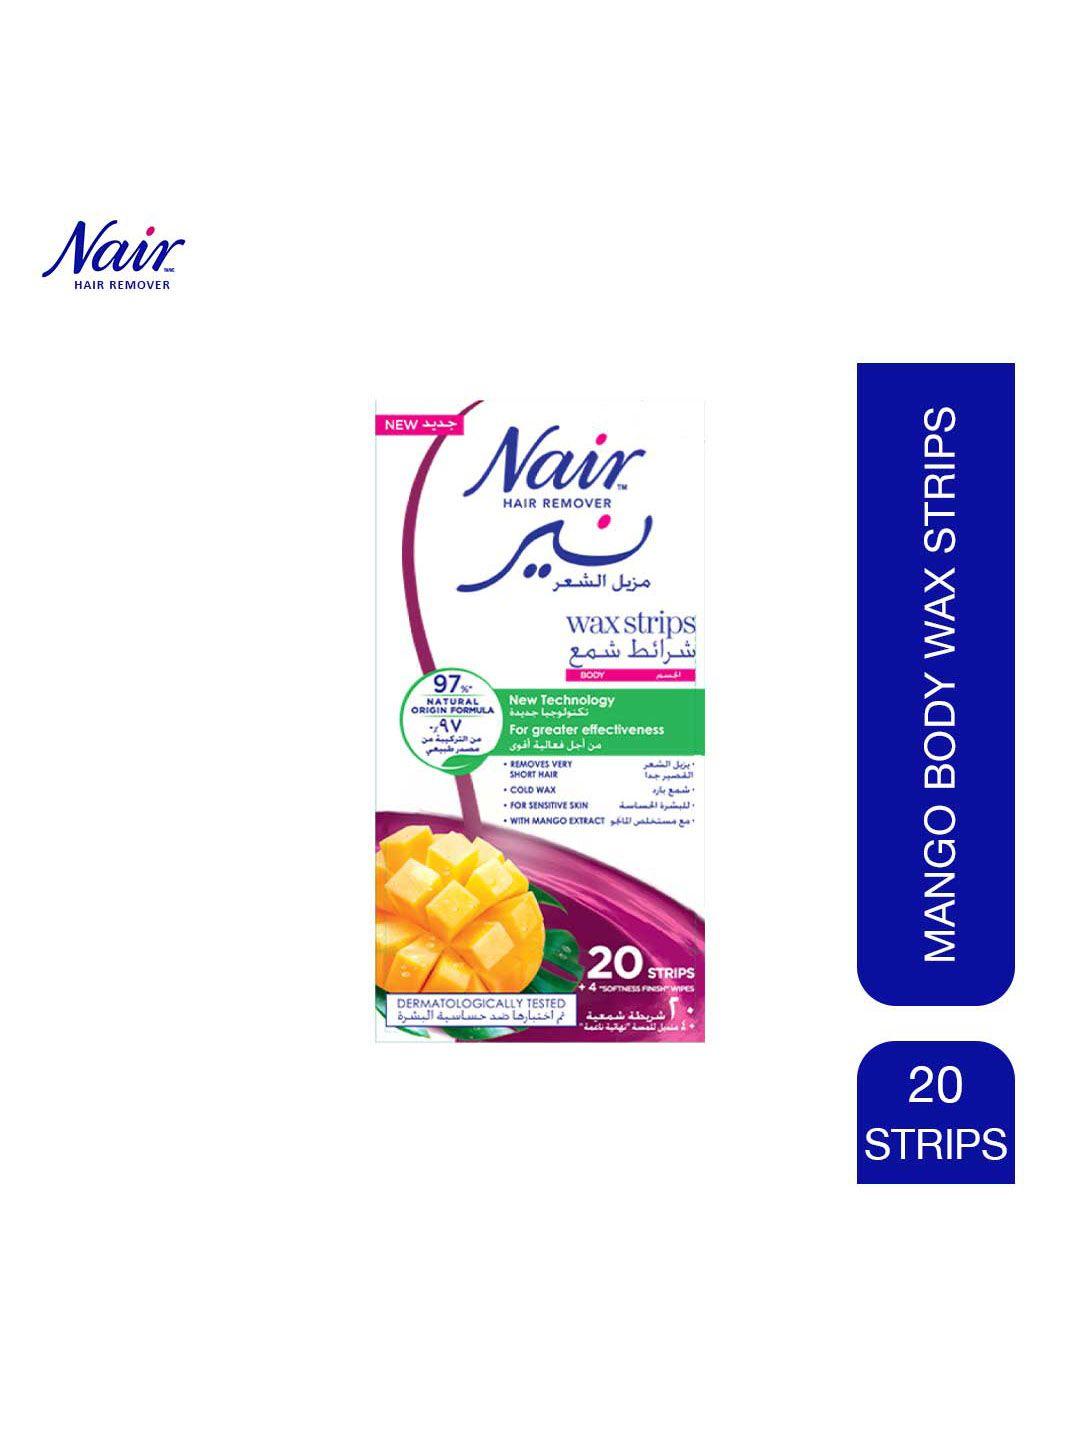 nair mango cold body wax with post-waxing wipes - 20 strips